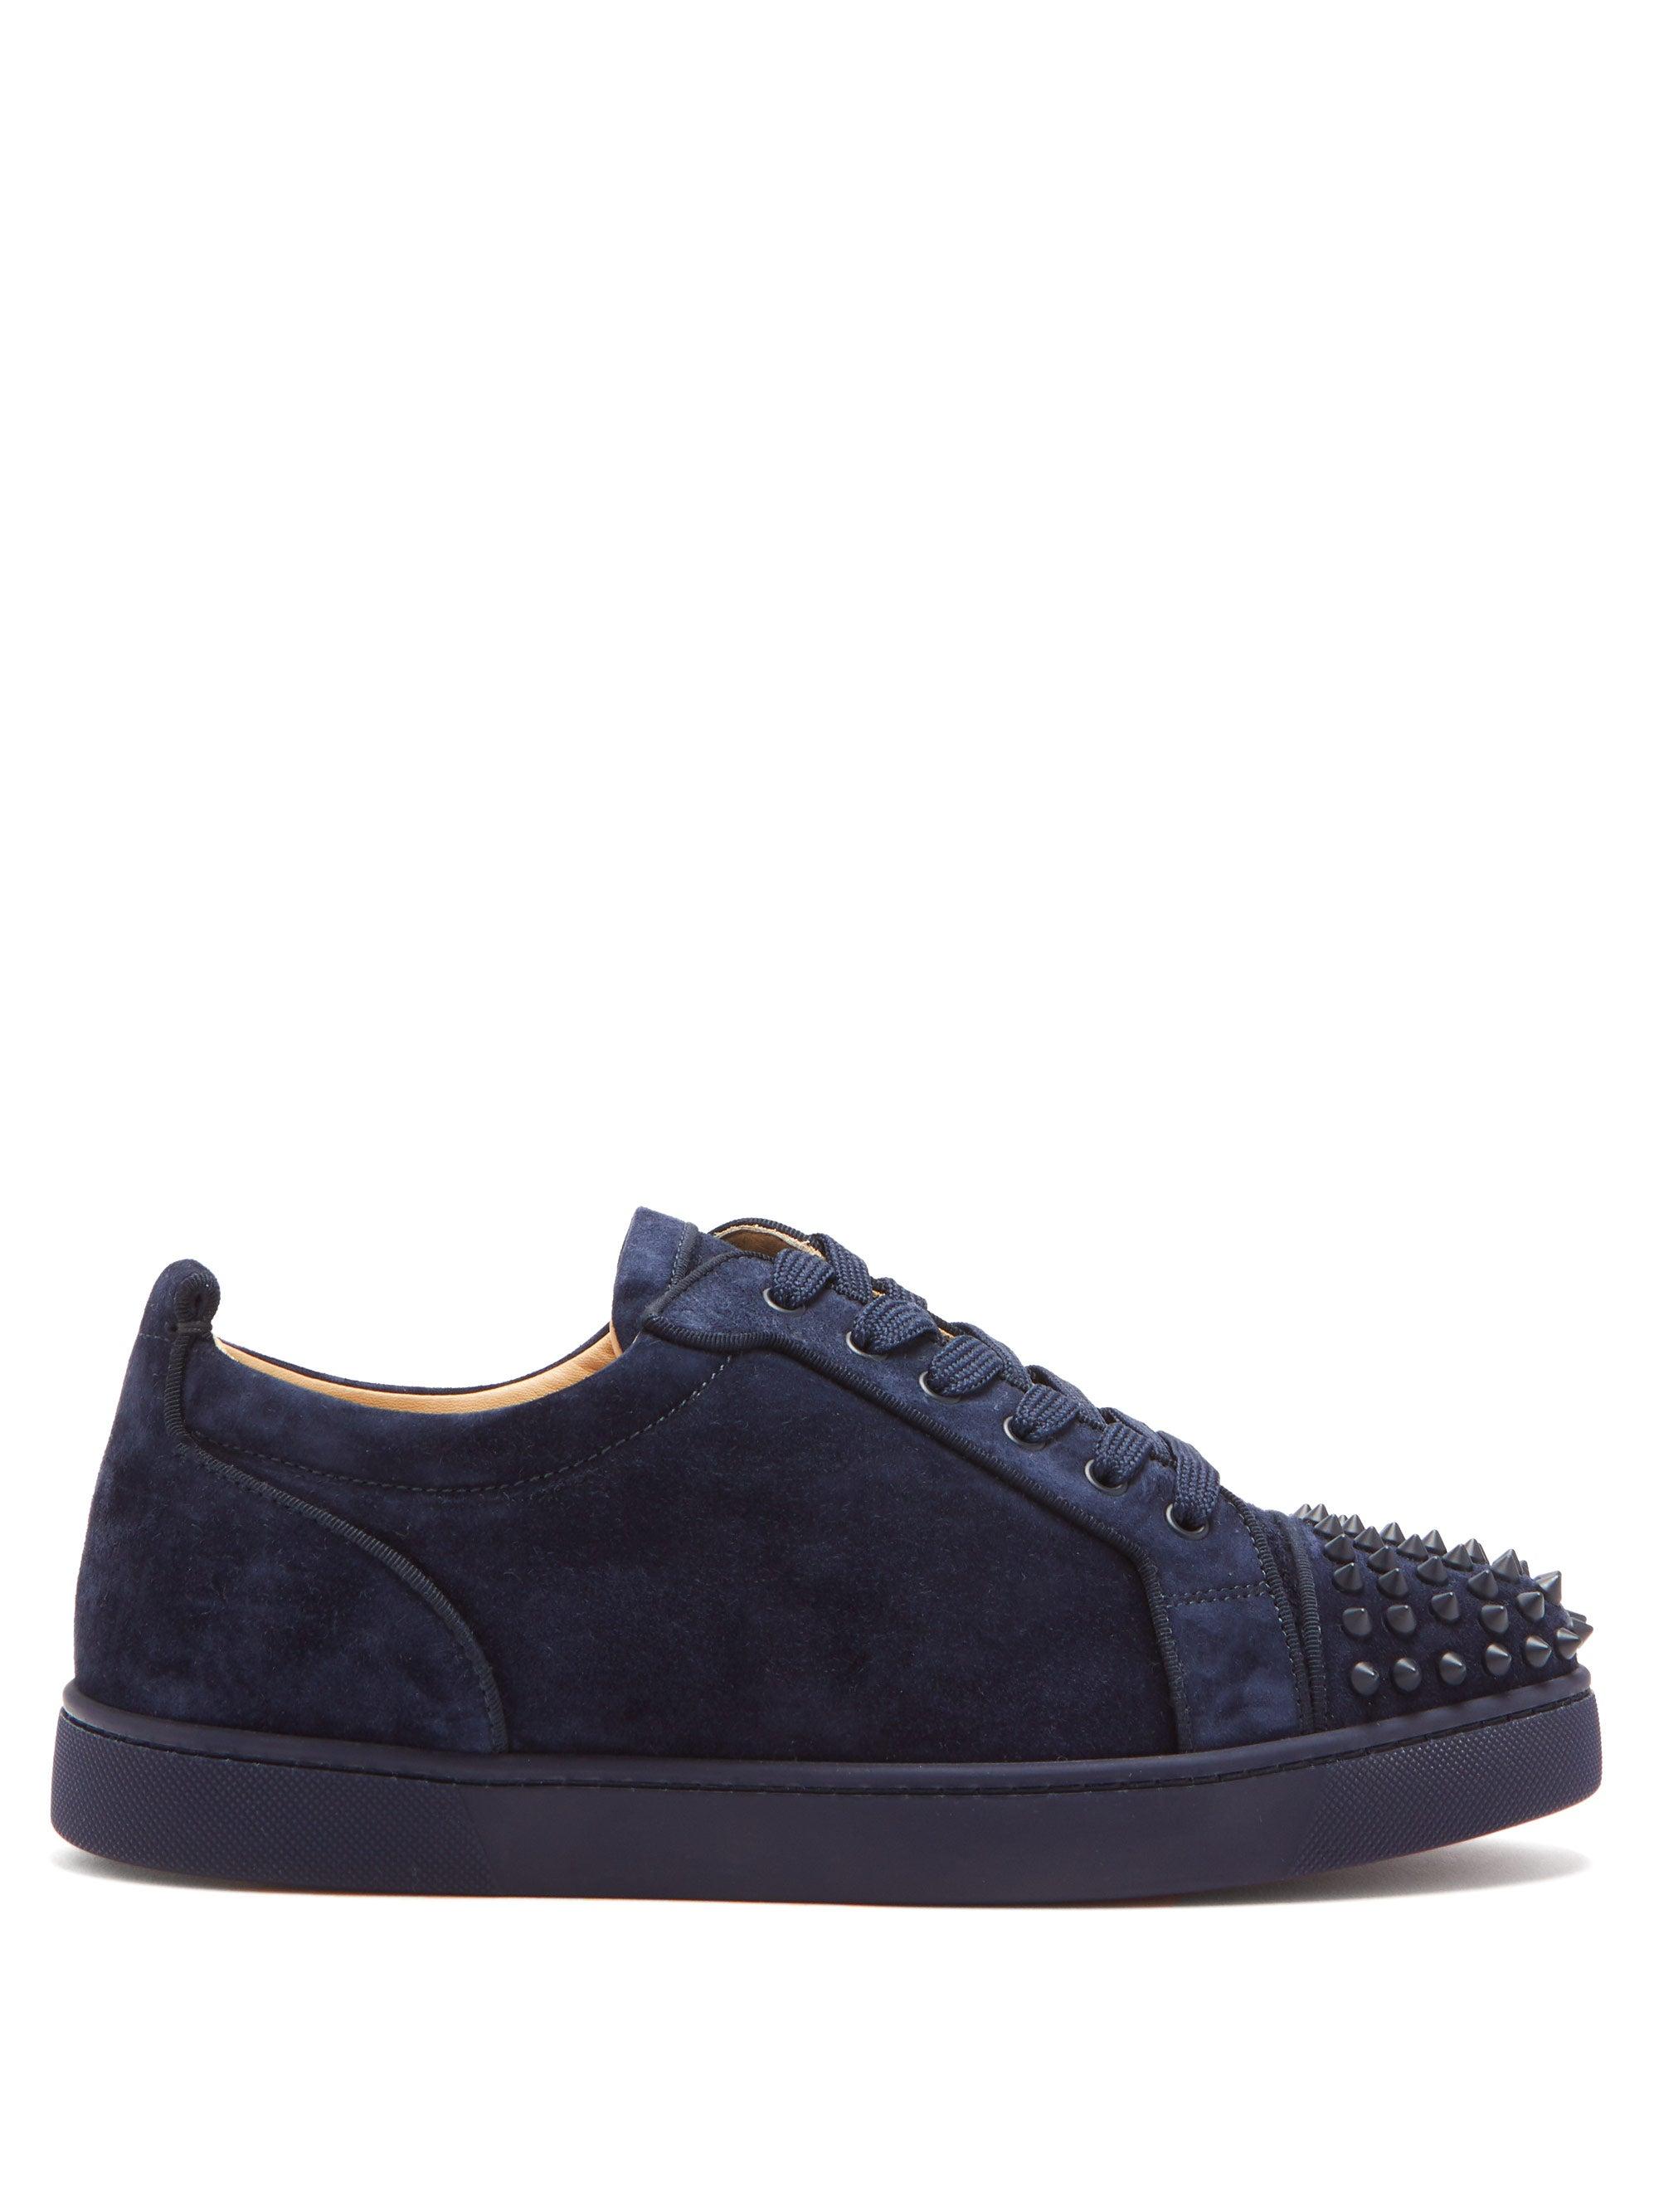 Christian Louboutin Louis Junior Spike-embellished Suede Trainers in ...